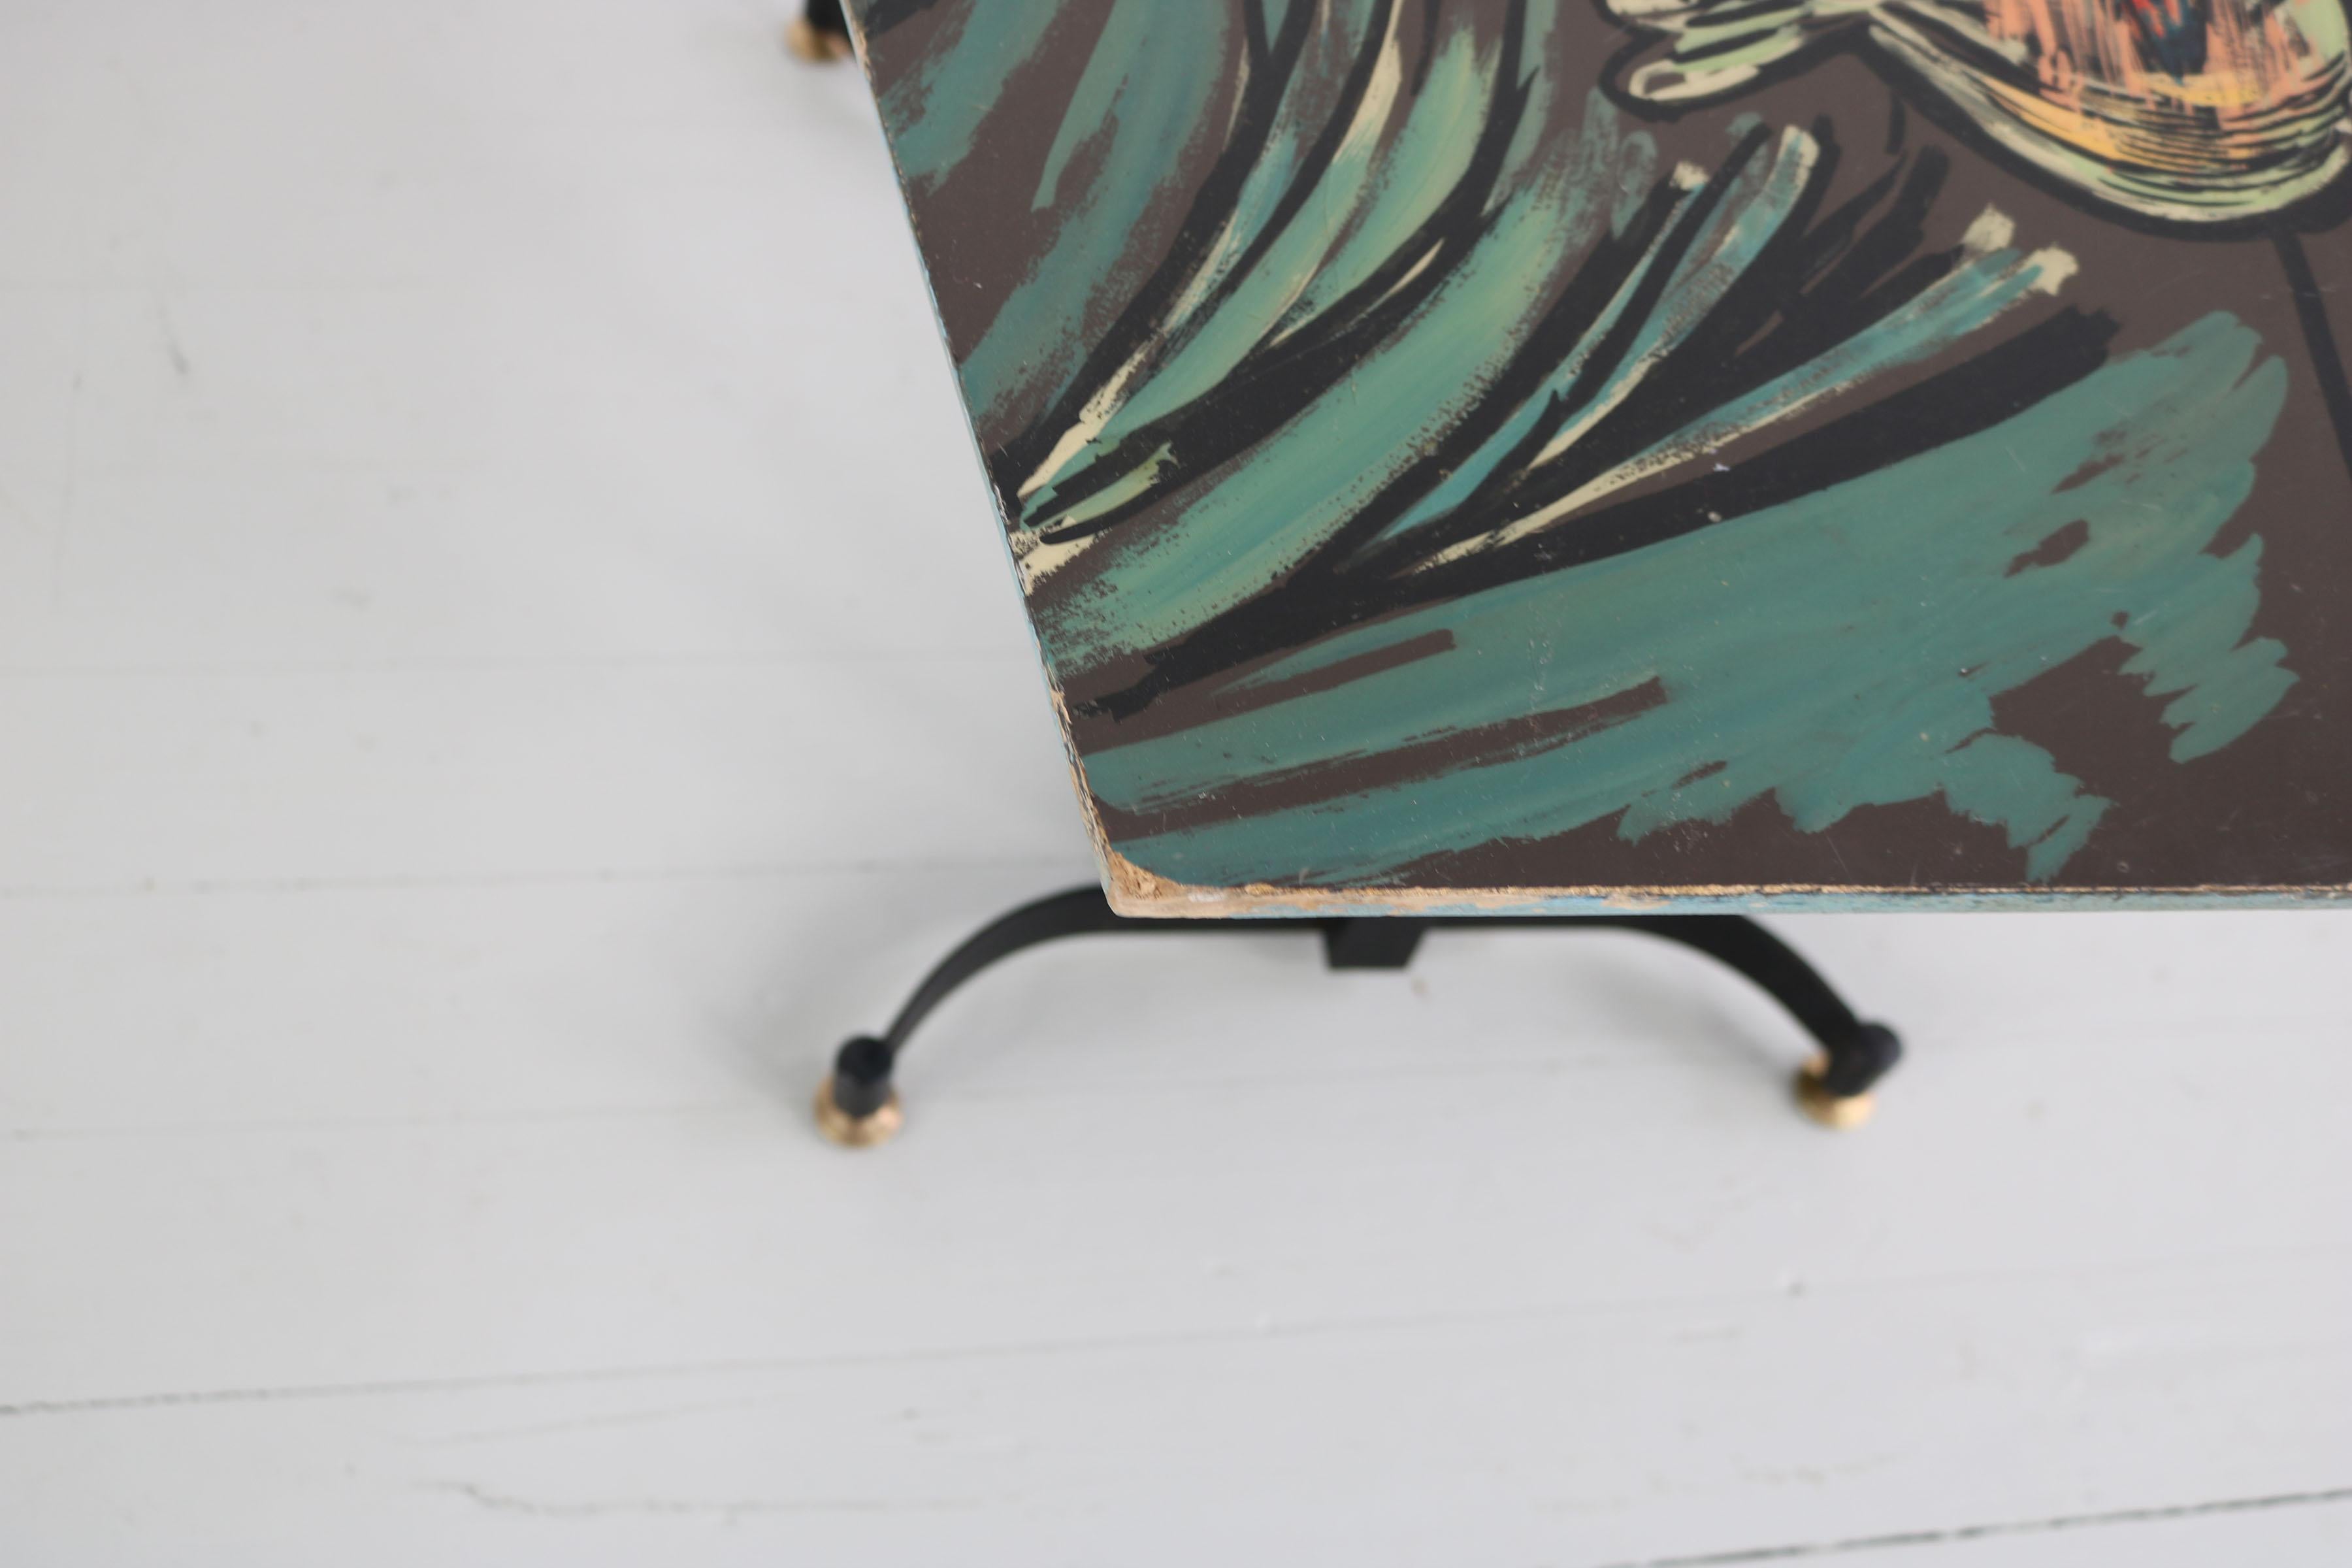 Italian Dark Sofa Table with Colorful Hand-Painted Motives on Table Top, 1950s For Sale 5